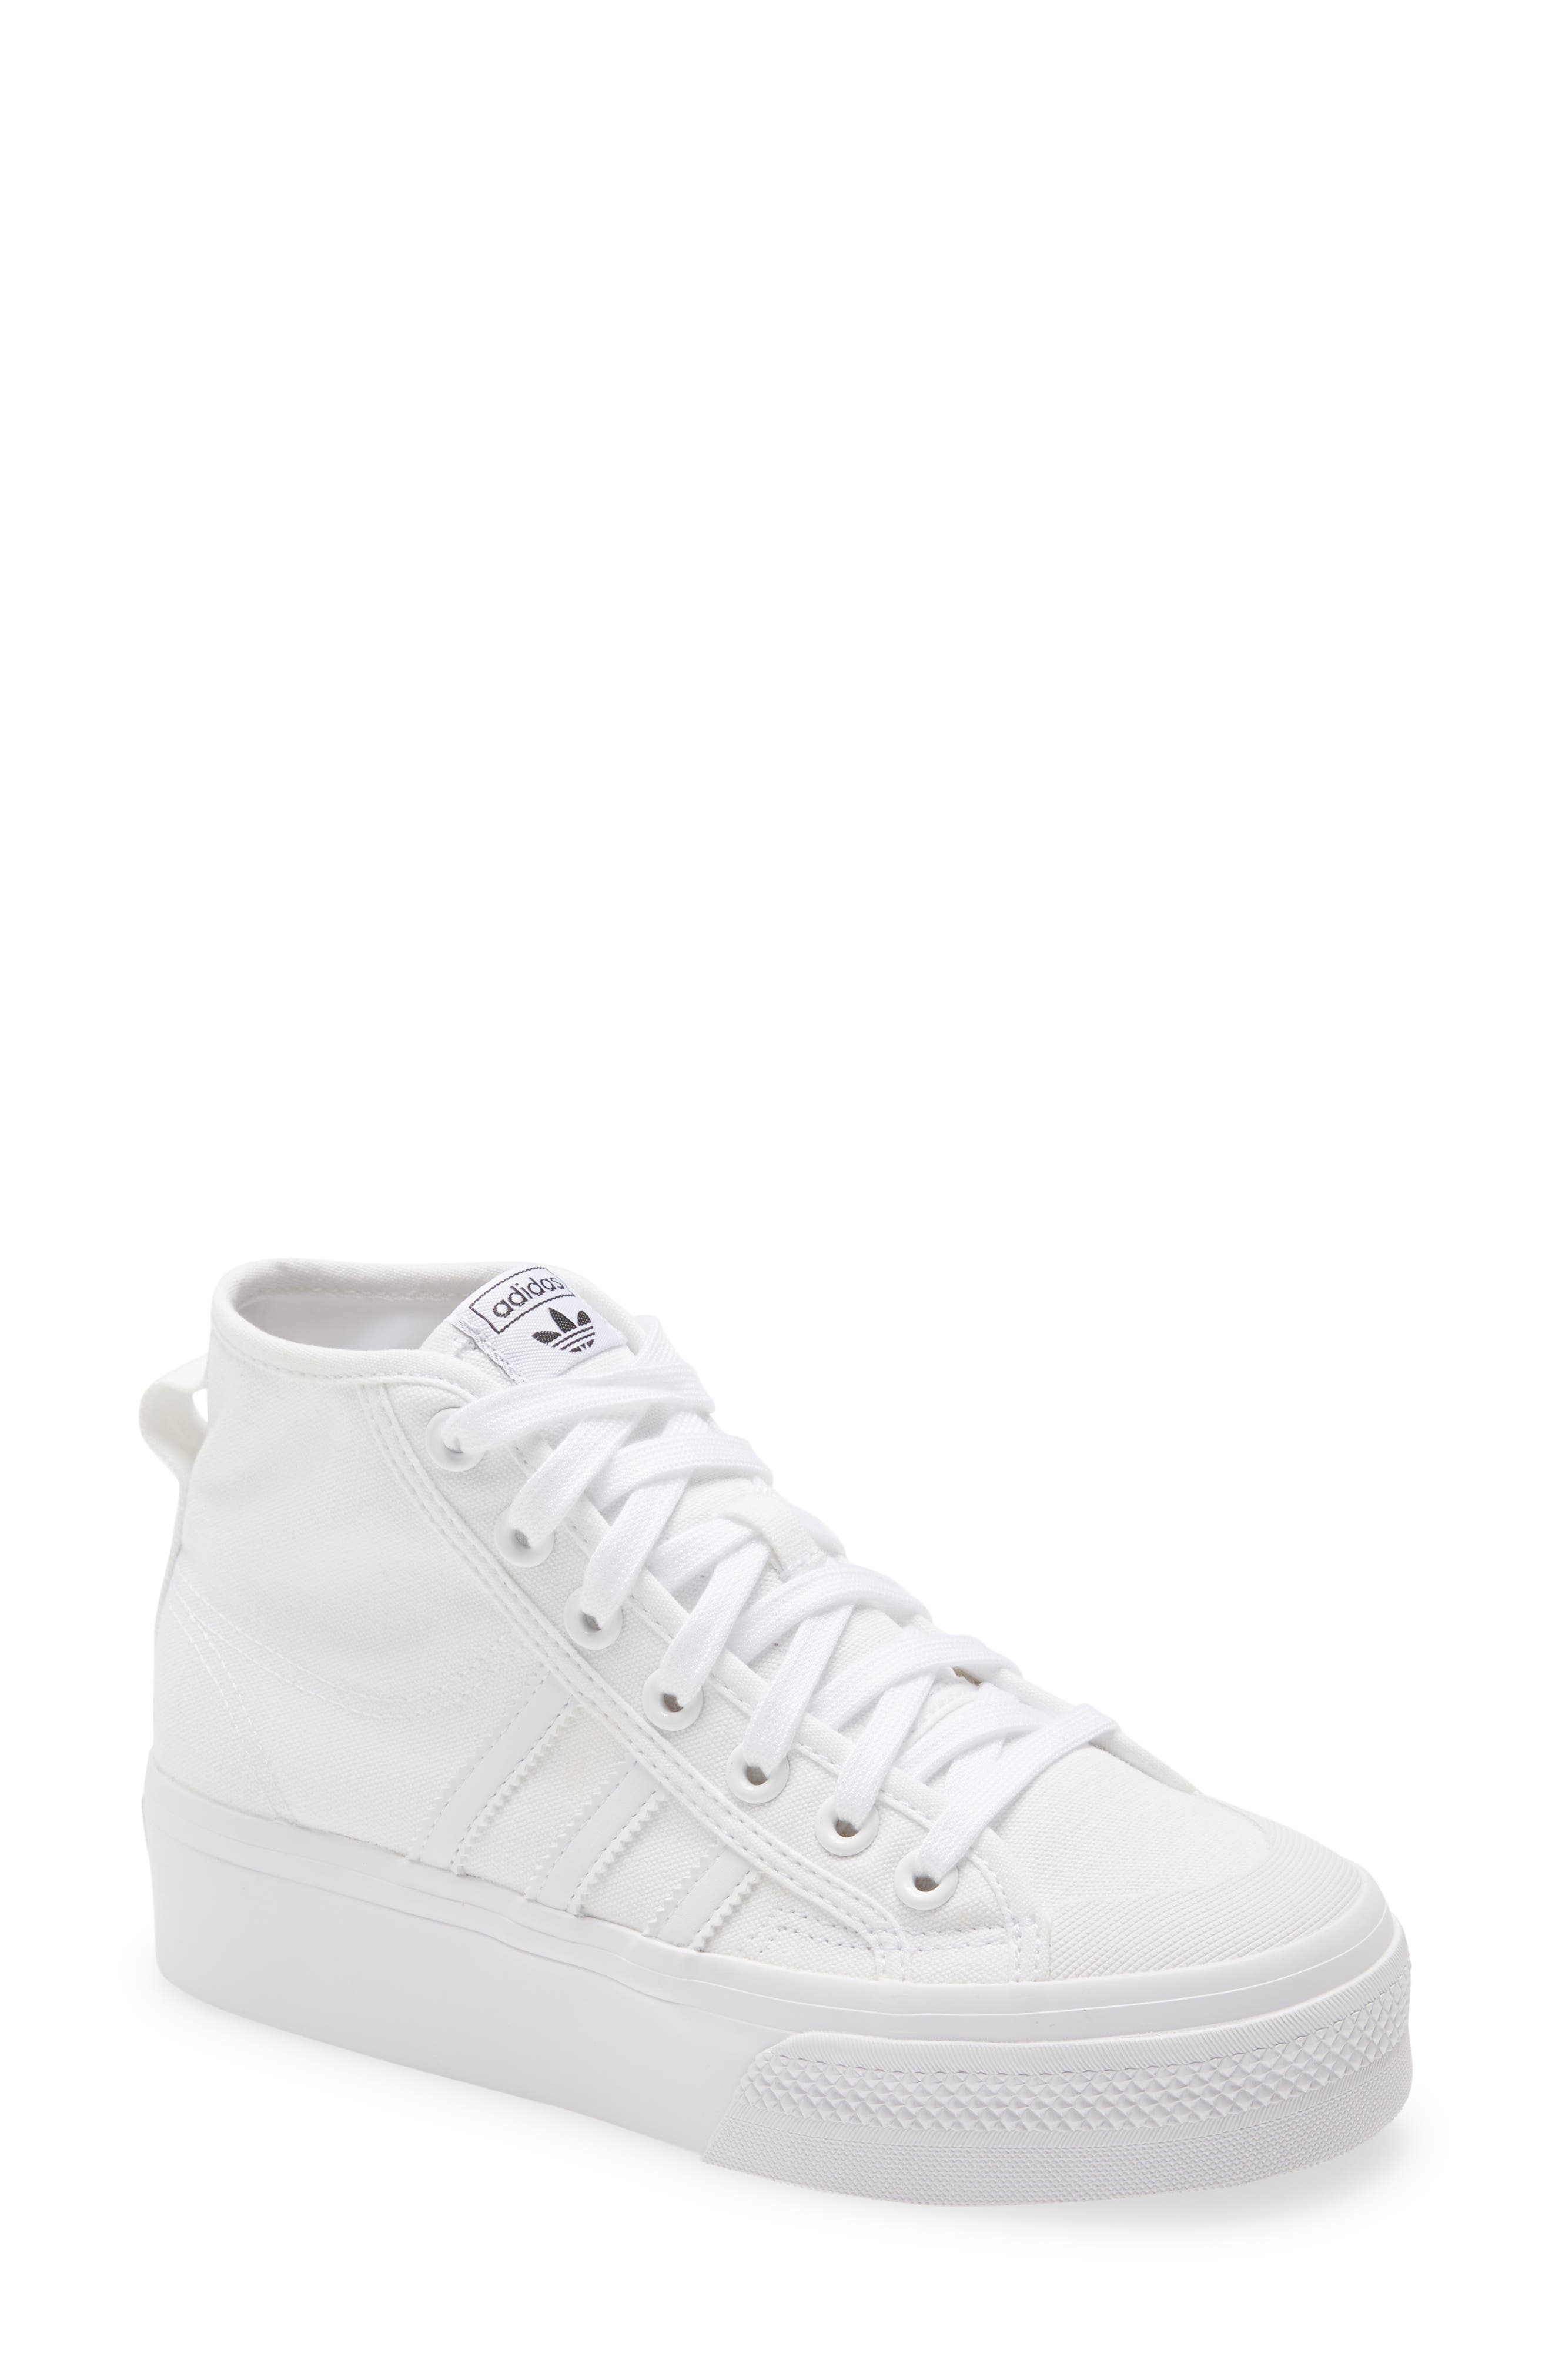 mens to womens adidas shoe size